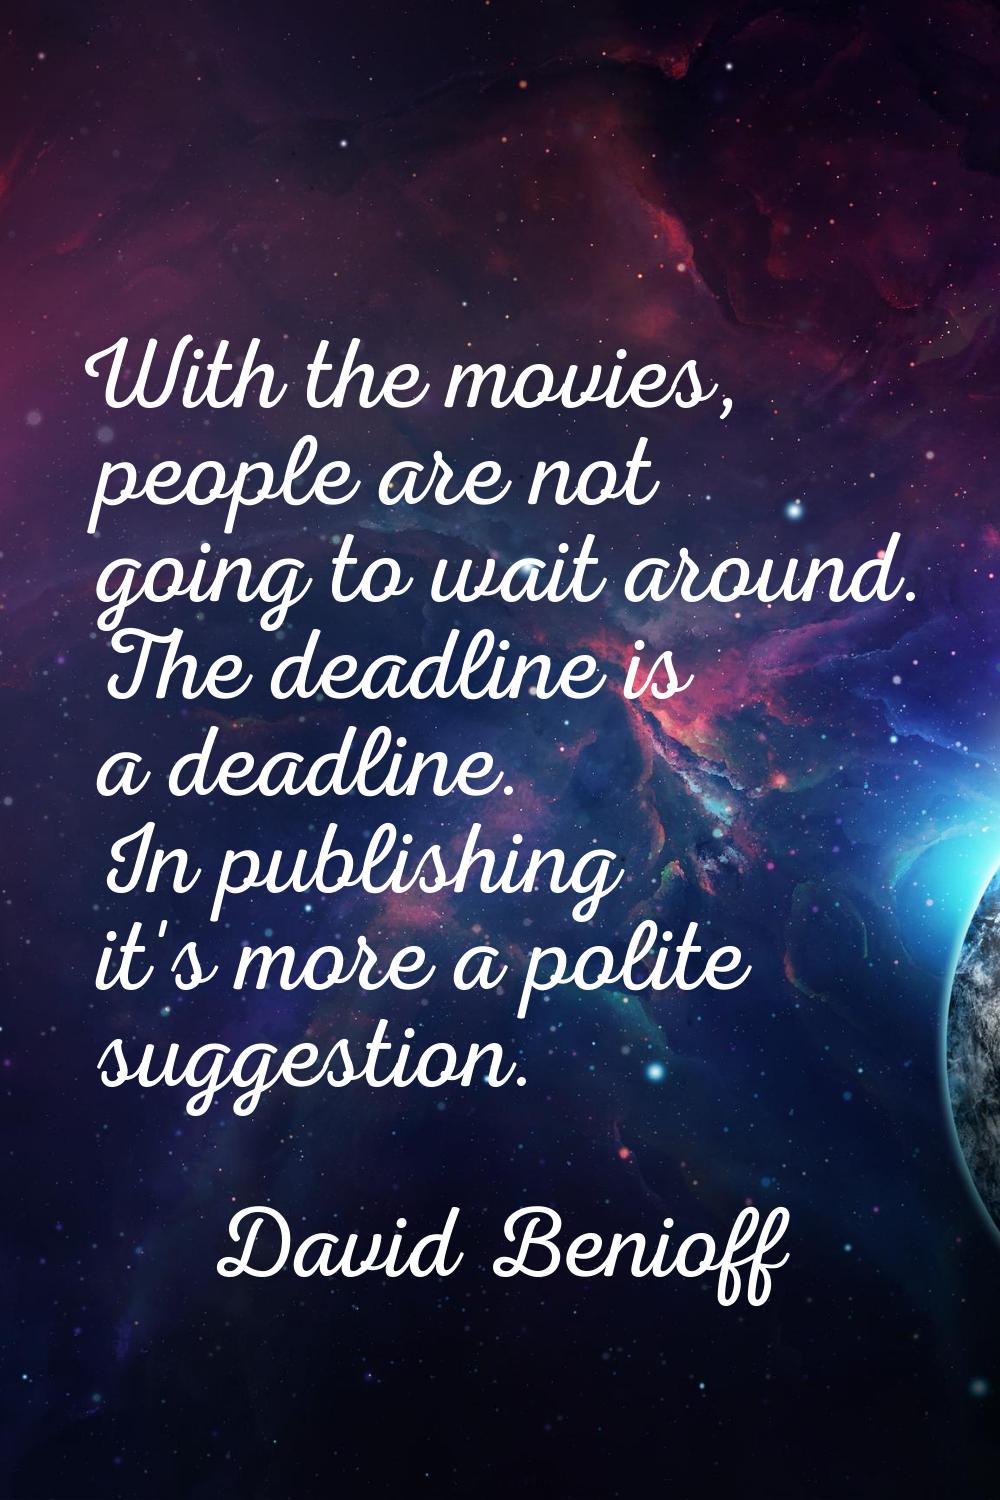 With the movies, people are not going to wait around. The deadline is a deadline. In publishing it'